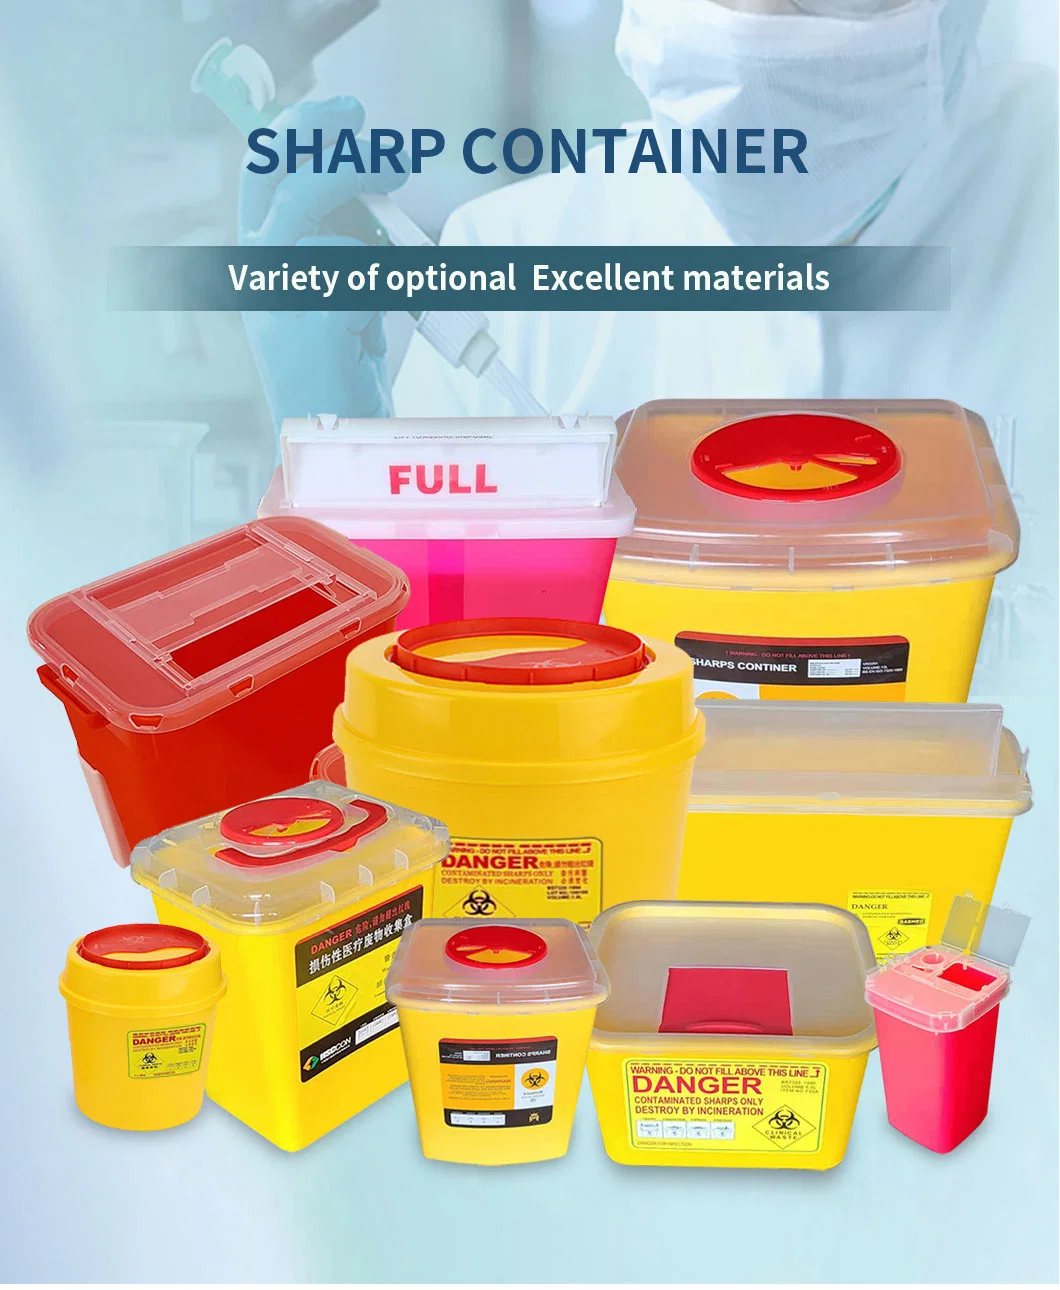 Medical Safety Disposable Plastic Sharp Container/Sharps Bins / Needle Container/PP Medical Sharp Box/ Safety Bin container for Chemo Waste